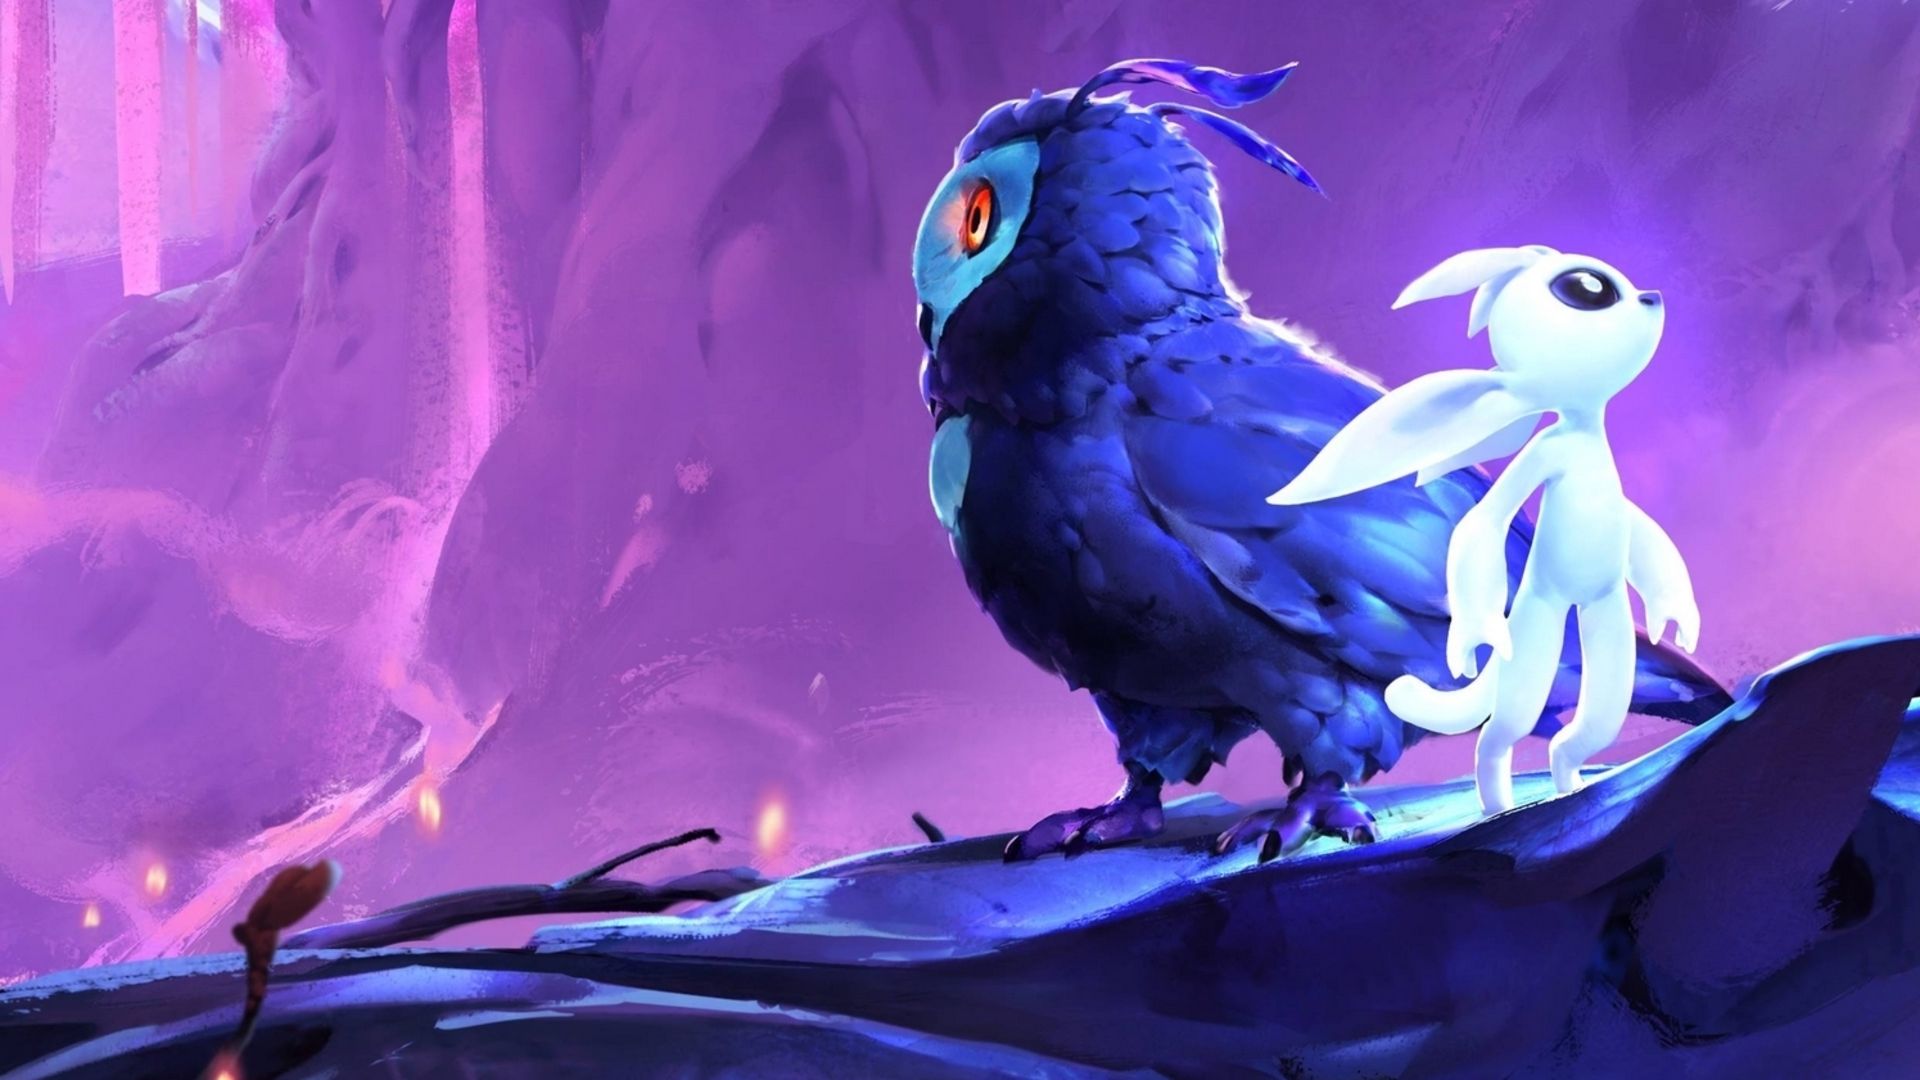 ori and the will of the wisps switch release date